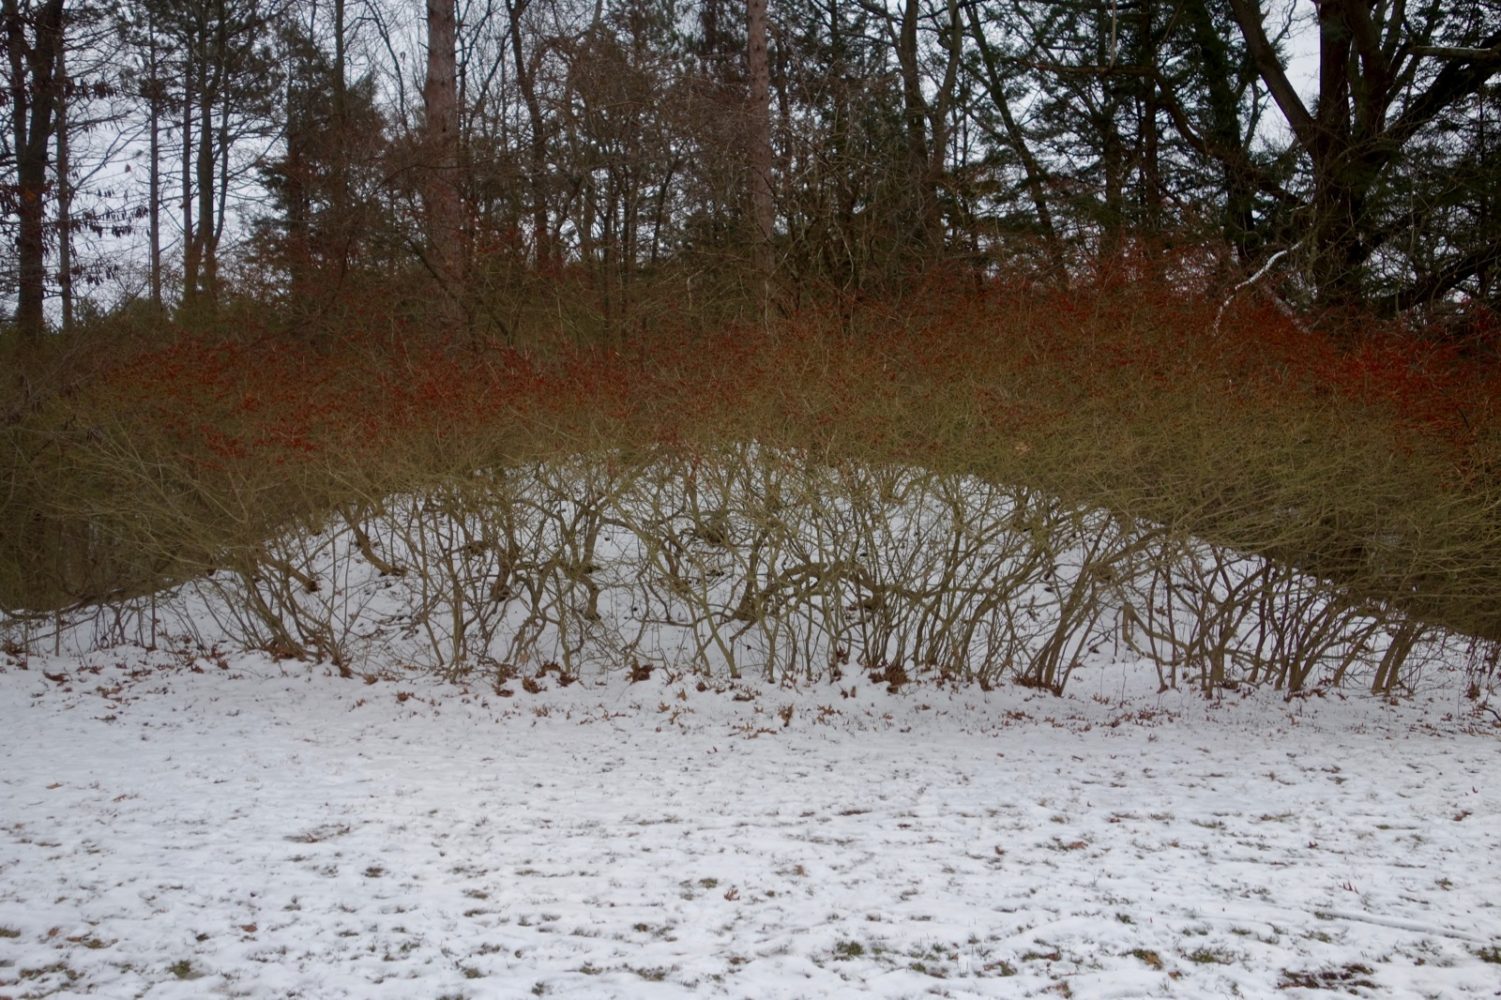 Burning bushes on hill in Durand Eastman, Winter 2019